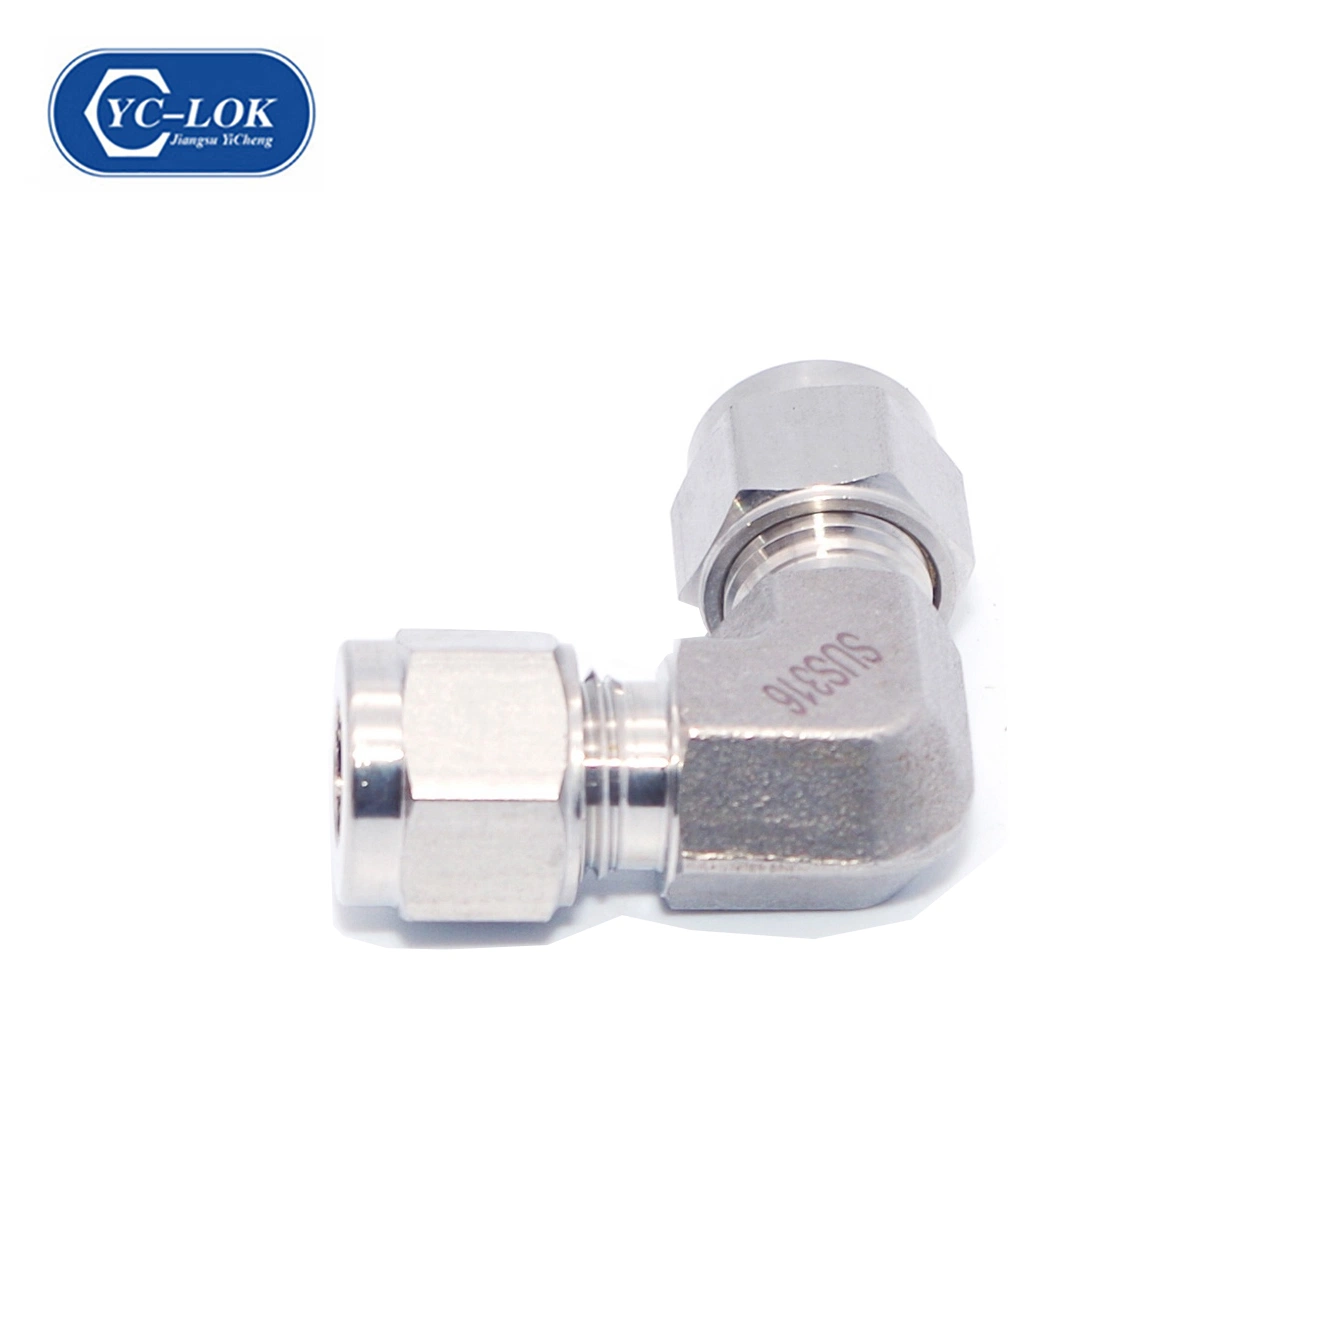 Double Ferrule Compression Connector 316 Ss Swagelok Tube Fitting Tee Elbow Union with Cutting Rings for Instrumentation